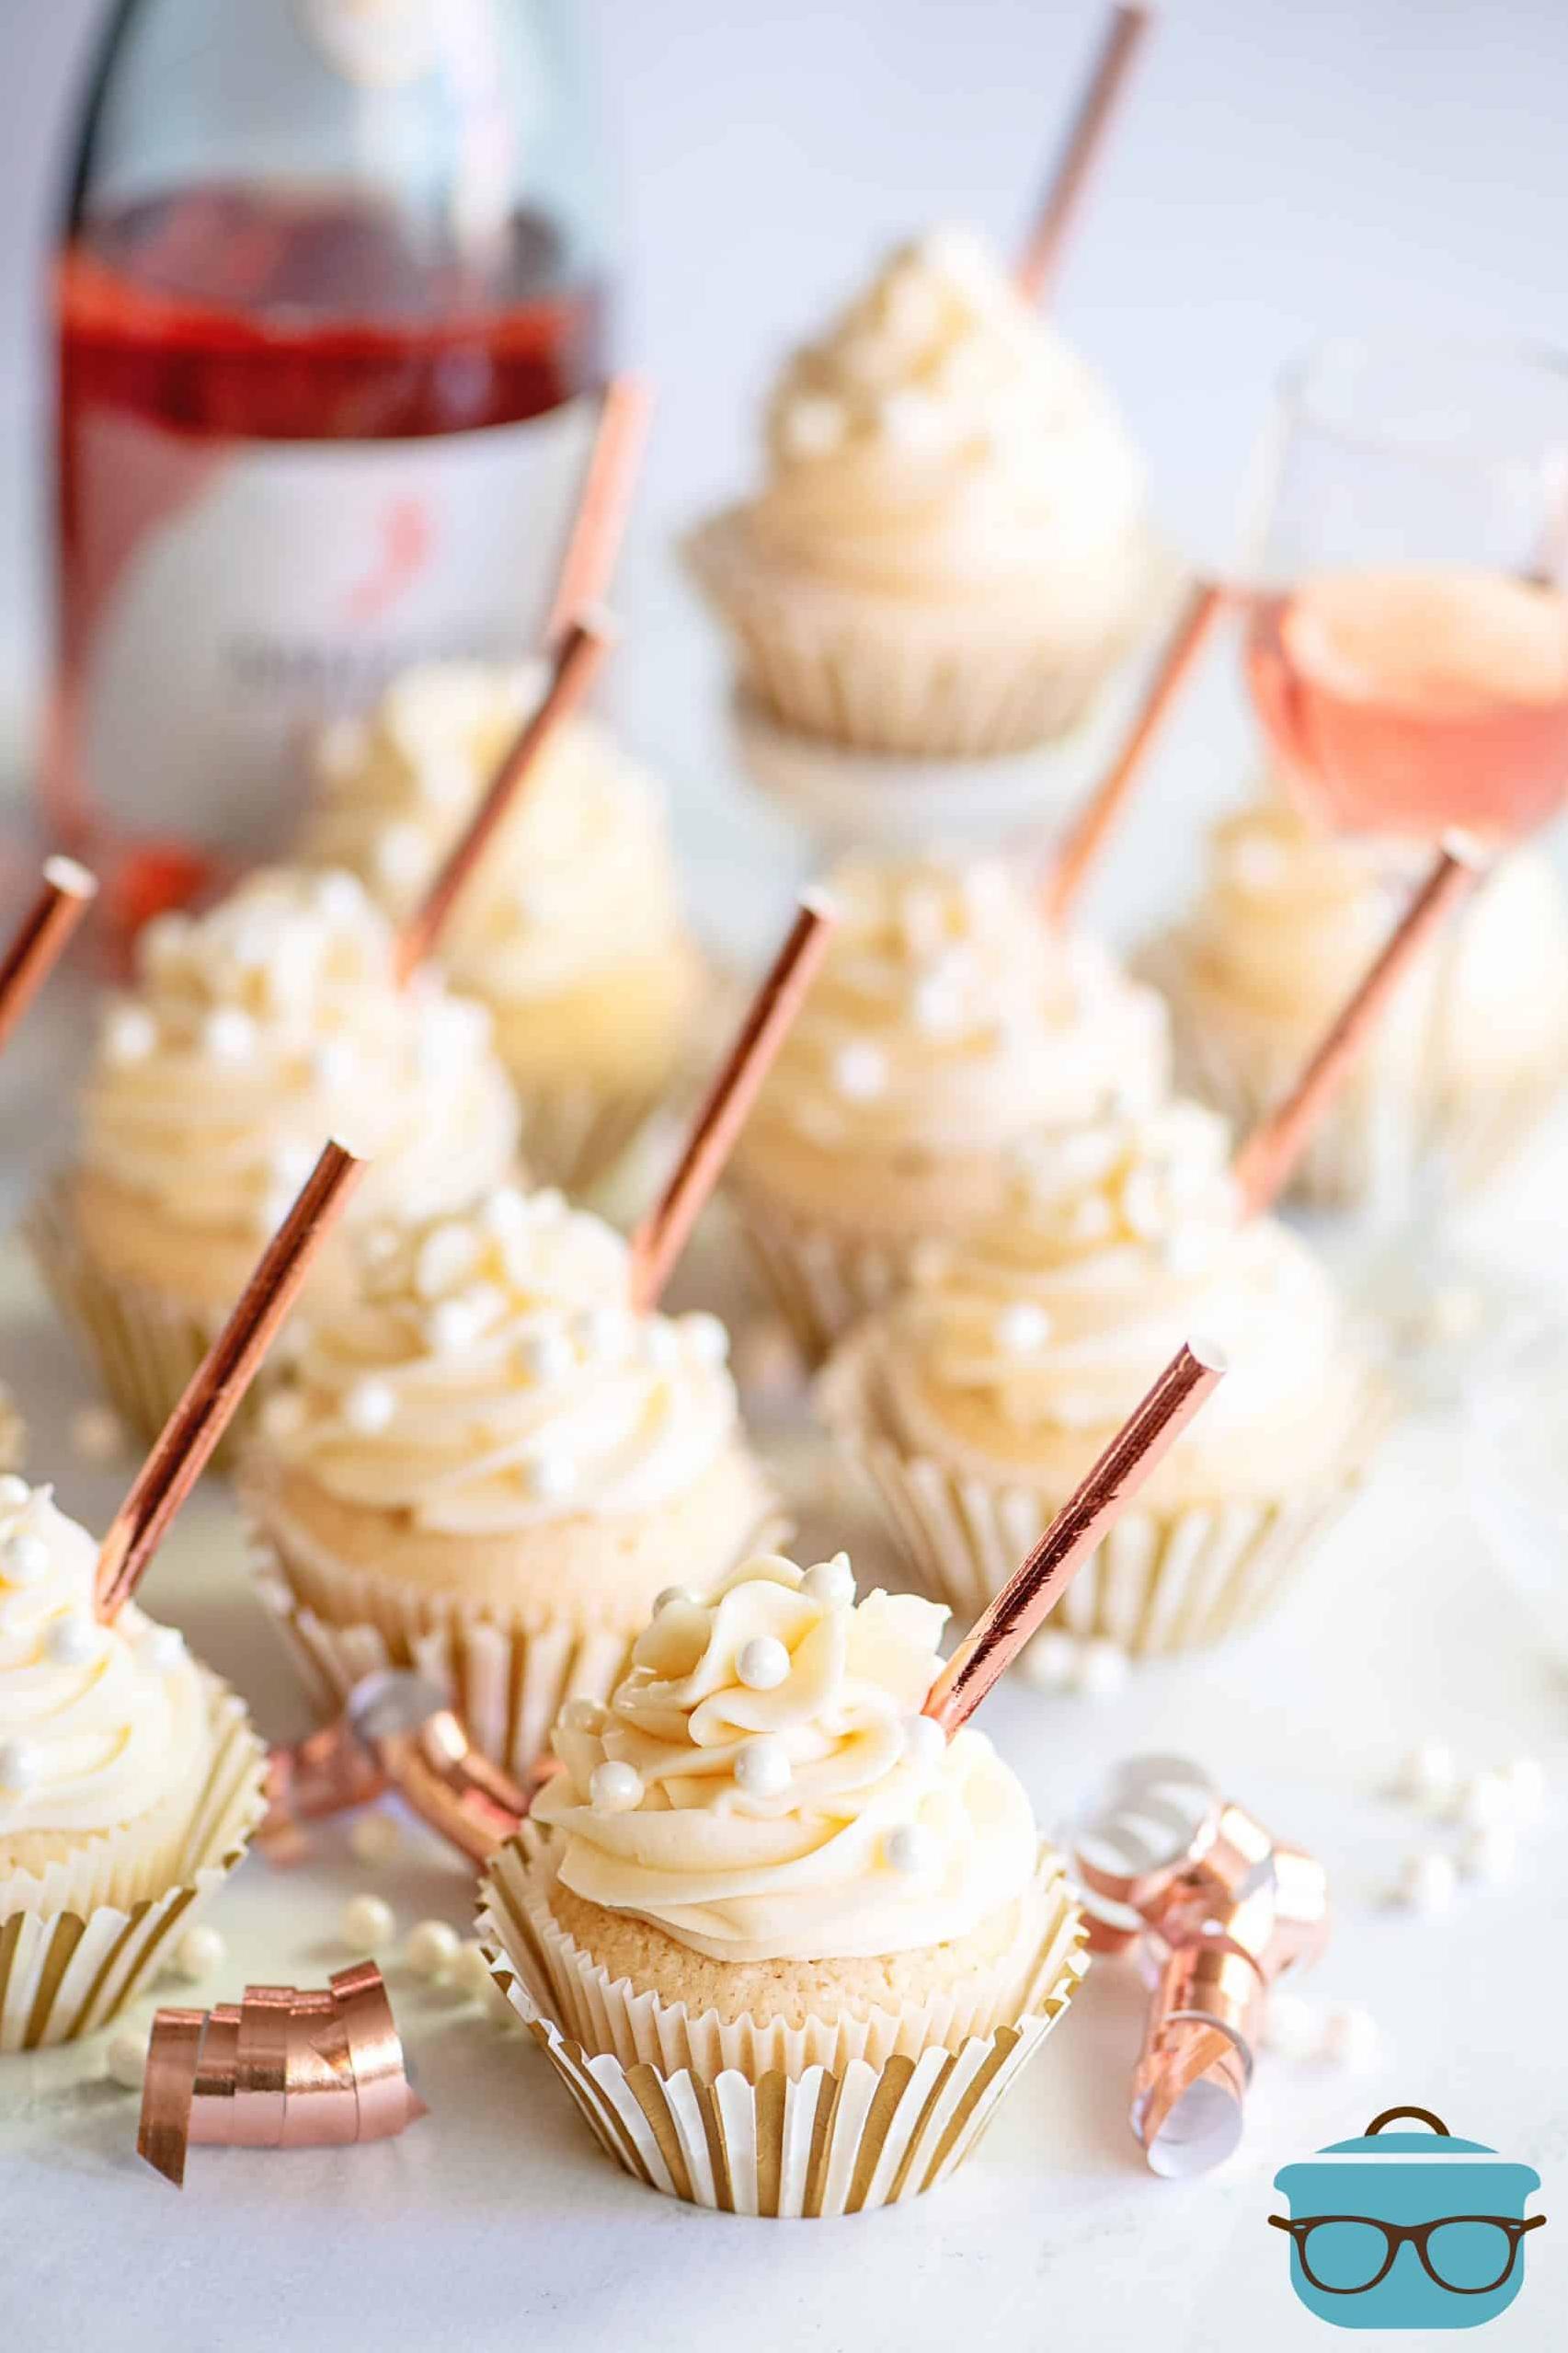  Get ready to pop the bubbly with these delightful Pear Champagne Cupcakes!